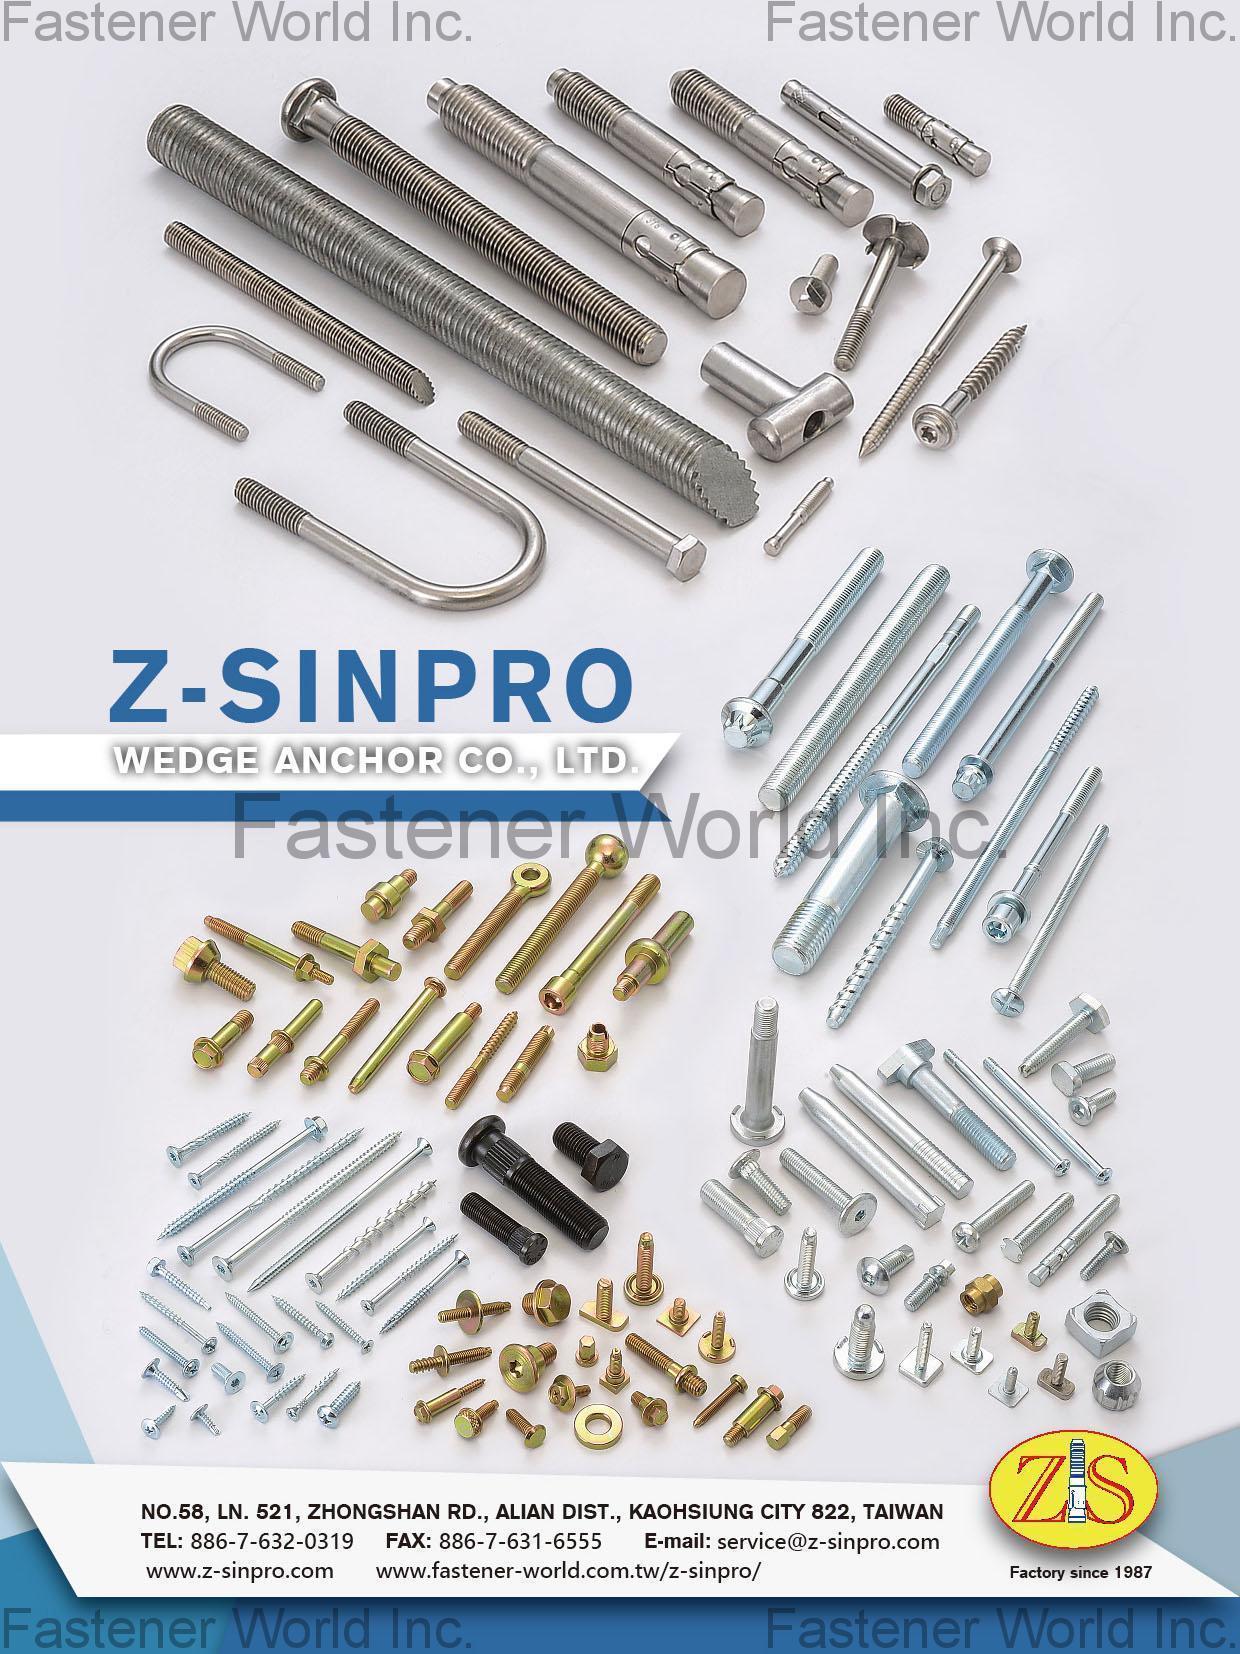 Z-SINPRO WEDGE ANCHOR CO., LTD. , Stainless Special Bolts, Special Screws, Special/Custom Concrete Wedge Anchor, Stainless Sleeve Anchor, Dog Point Wedge Anchor, Double Collar Wedge Anchor, U Bolt, Flat Washer, Thread rods, Chemical Anchor, Weld Bolt, T bolt, Hex bolt, Carriage bolt, Six-lobes screws, Hex nuts, DIN 934, DIN 125, Drop in Anchor, Spacer, Bushing, Roller, Tube, Brass Nut, Eye Bolt, T Bolt, Weld Stud, Anchor Bolt, Lag bolt, Wall Anchor, Plastic Anchor, Zinc Hammer Drive Anchor, Wood Screw, Machine Screw, Lag Screw, Hanger Screw, Hot Forge Bolt, Construction Fastener, Long Screw, Stainless Eye Bolt (Eye Screw) , Concrete Anchors